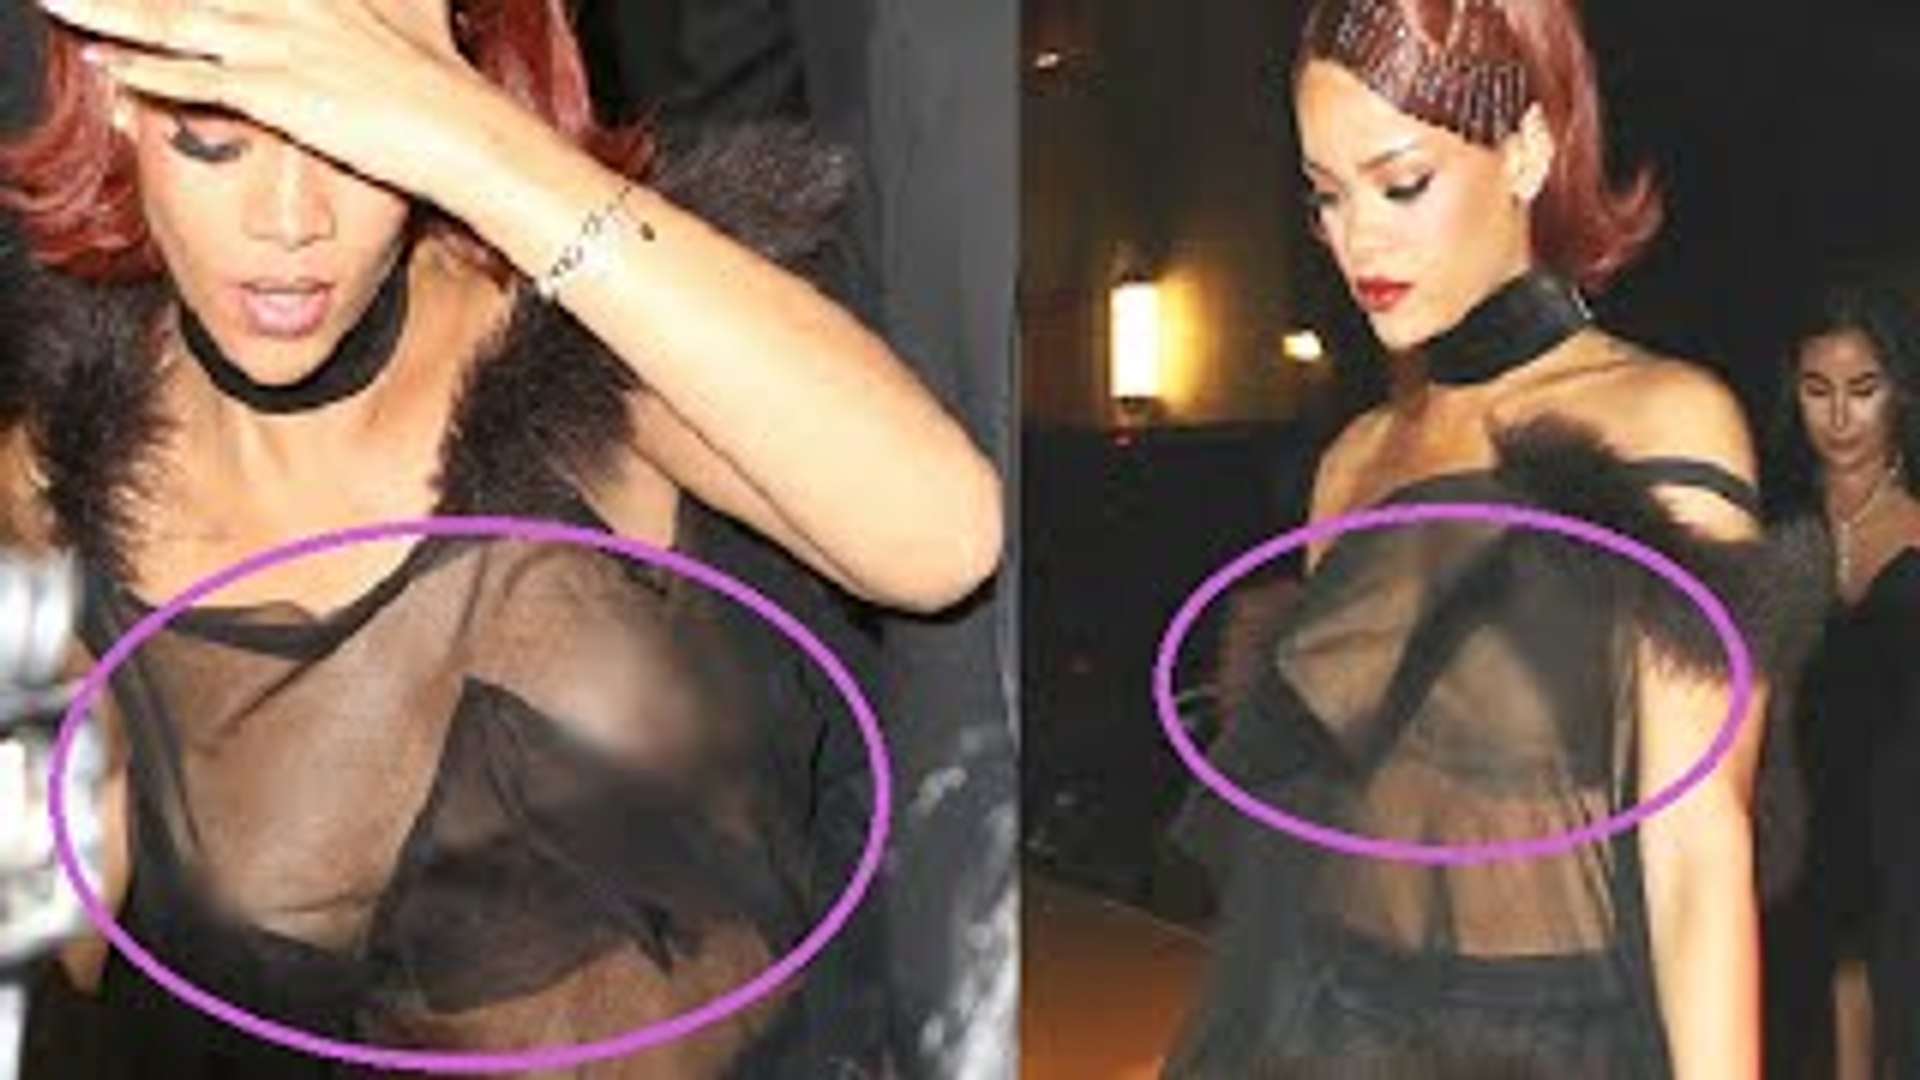 Rihanna Double Nip Slip At MET Gala 2015 After party - The